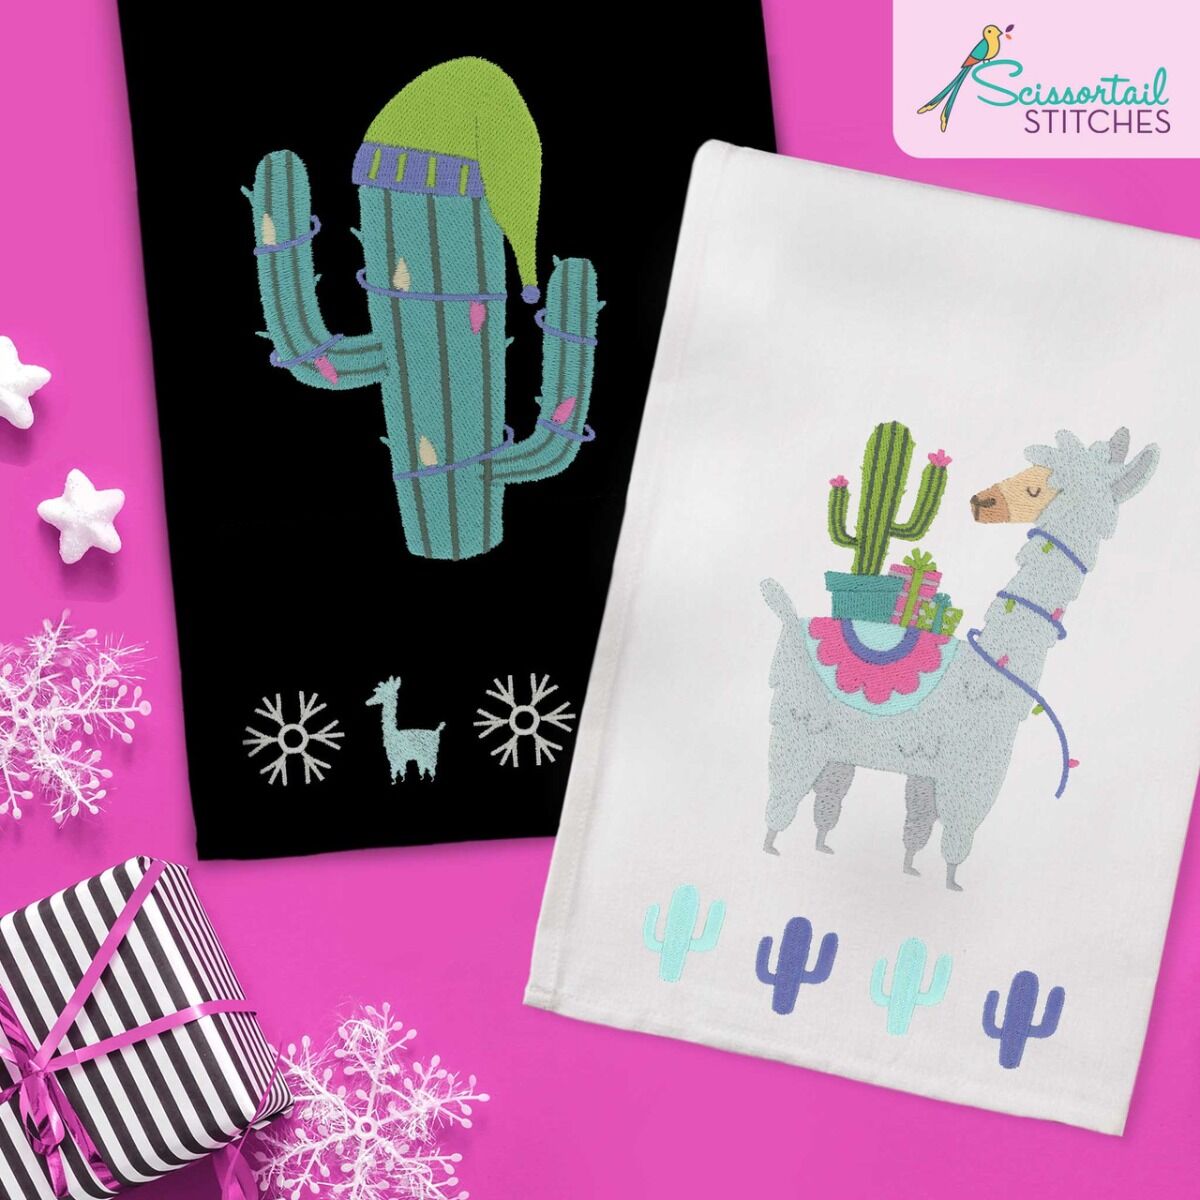 OESD Happy Llama Days Embroidery Collection by Ammie Gomez
,OESD Happy Llama Days Embroidery Collection by Ammie Gomez
,OESD Happy Llama Days Embroidery Collection by Ammie Gomez
,OESD Happy Llama Days Embroidery Collection by Ammie Gomez
